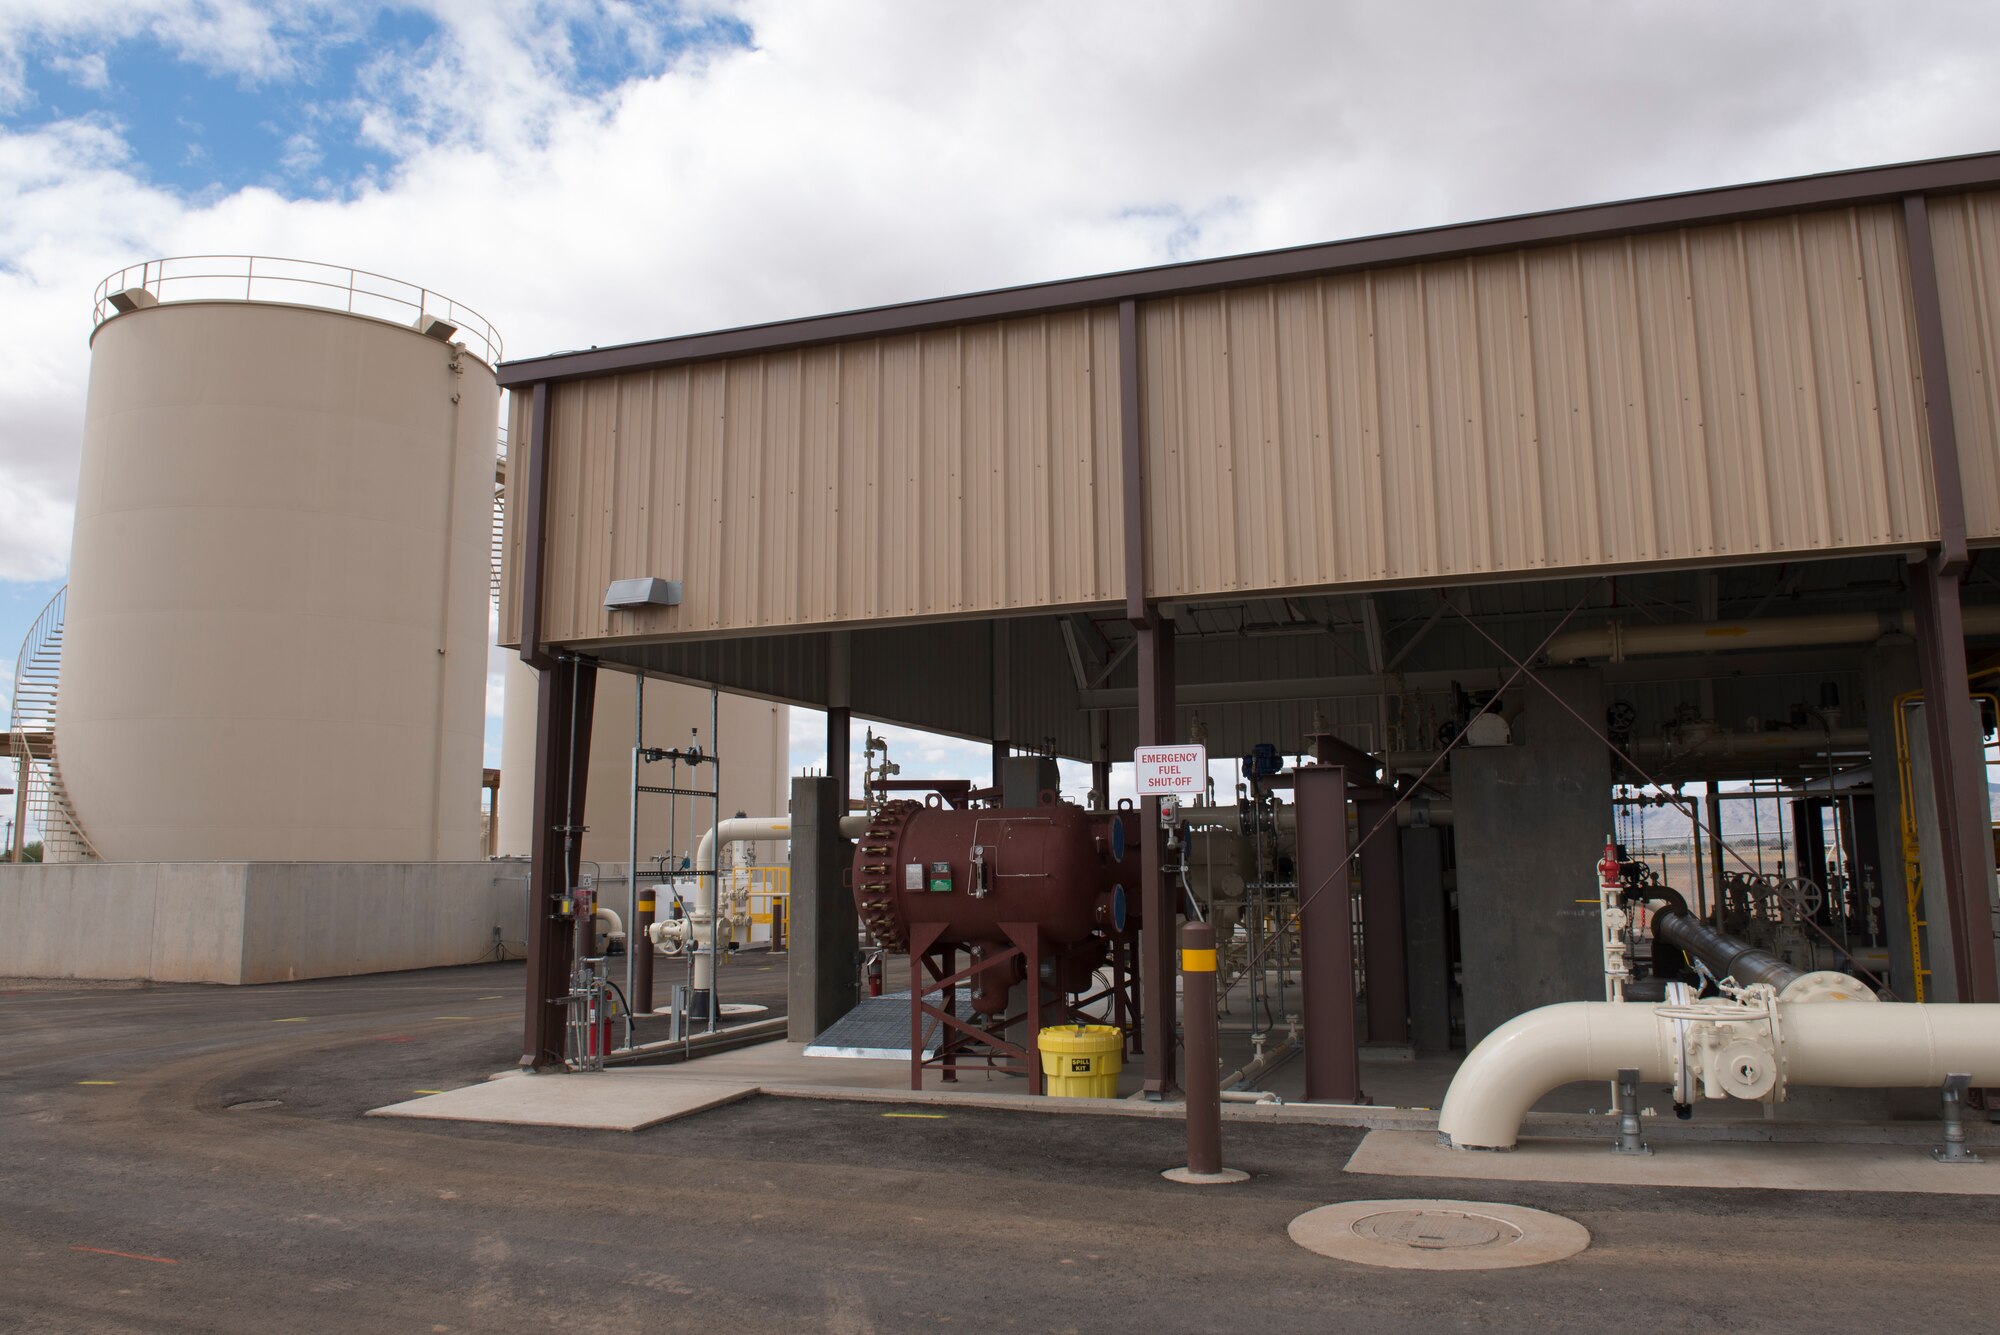 The 56th Logistics Readiness Squadron Fuels Management Flight pump house at Luke Air Force Base, Ariz., March 15, 2018. The pump house delivers fuel directly to a fill stand on the flight line, where fuel trucks supplying fighter aircraft refill. (U.S. Air Force photo by Senior Airman Ridge Shan)